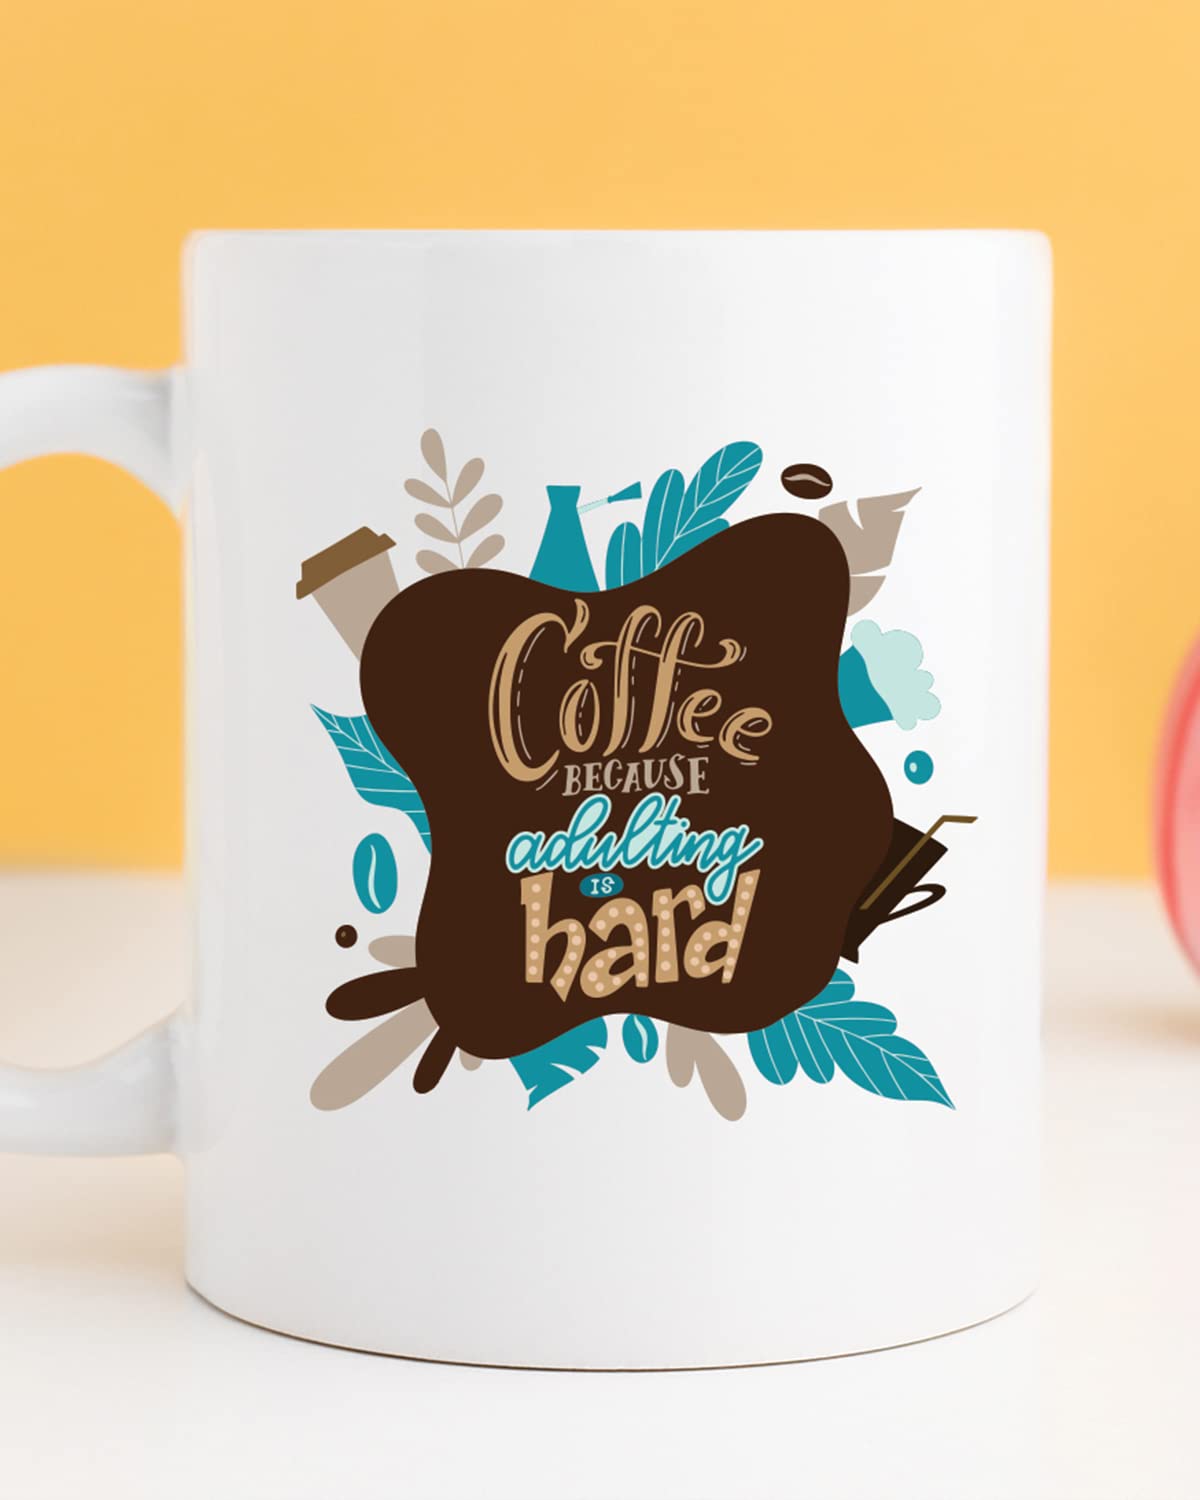 COFFEE BECAUSE ADULTING IS HARD Coffee Mug - Caffeine lover, Birthday Gift, Motivational Mug, Printed with Inspiring Quotes, Inspirational gift for Him & Her, Best Friend Gift, Gifts for Her, Cheer Up Gift